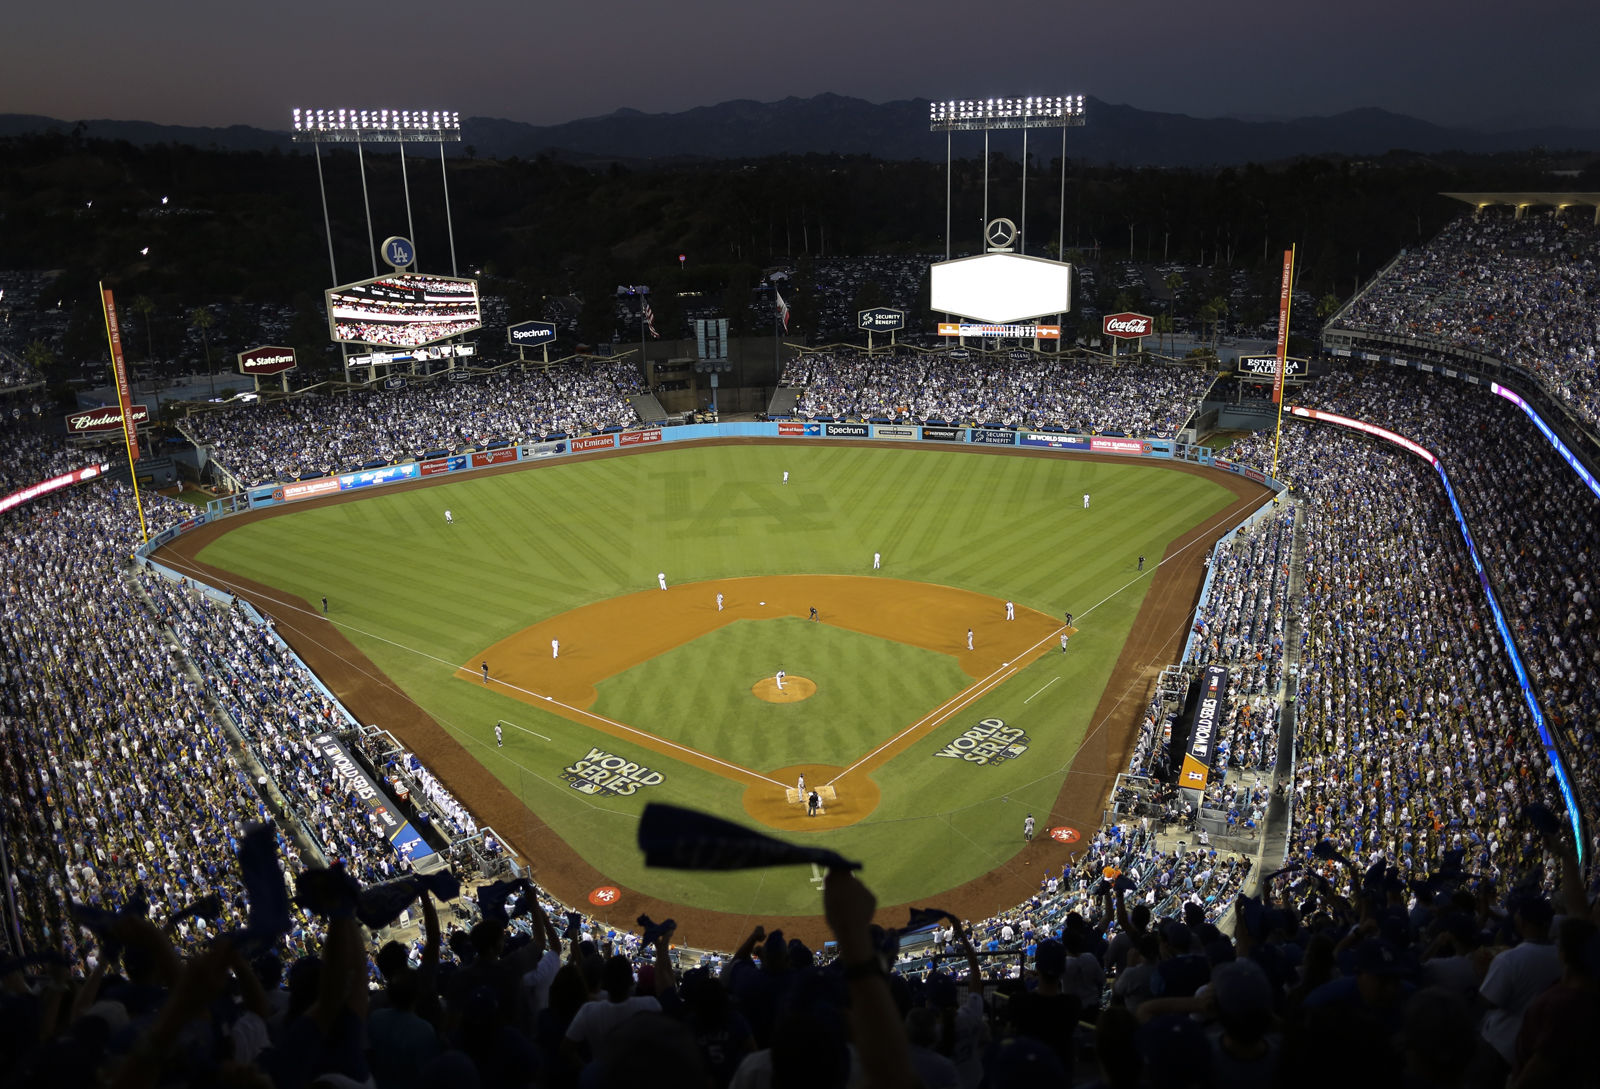 Dodgers Stadium, seen here during the 2017 World Series, is the third oldest stadium in baseball but its only No. 11 on the list with average cost of $73.83. File. (AP Photo/Tim Donnelly)